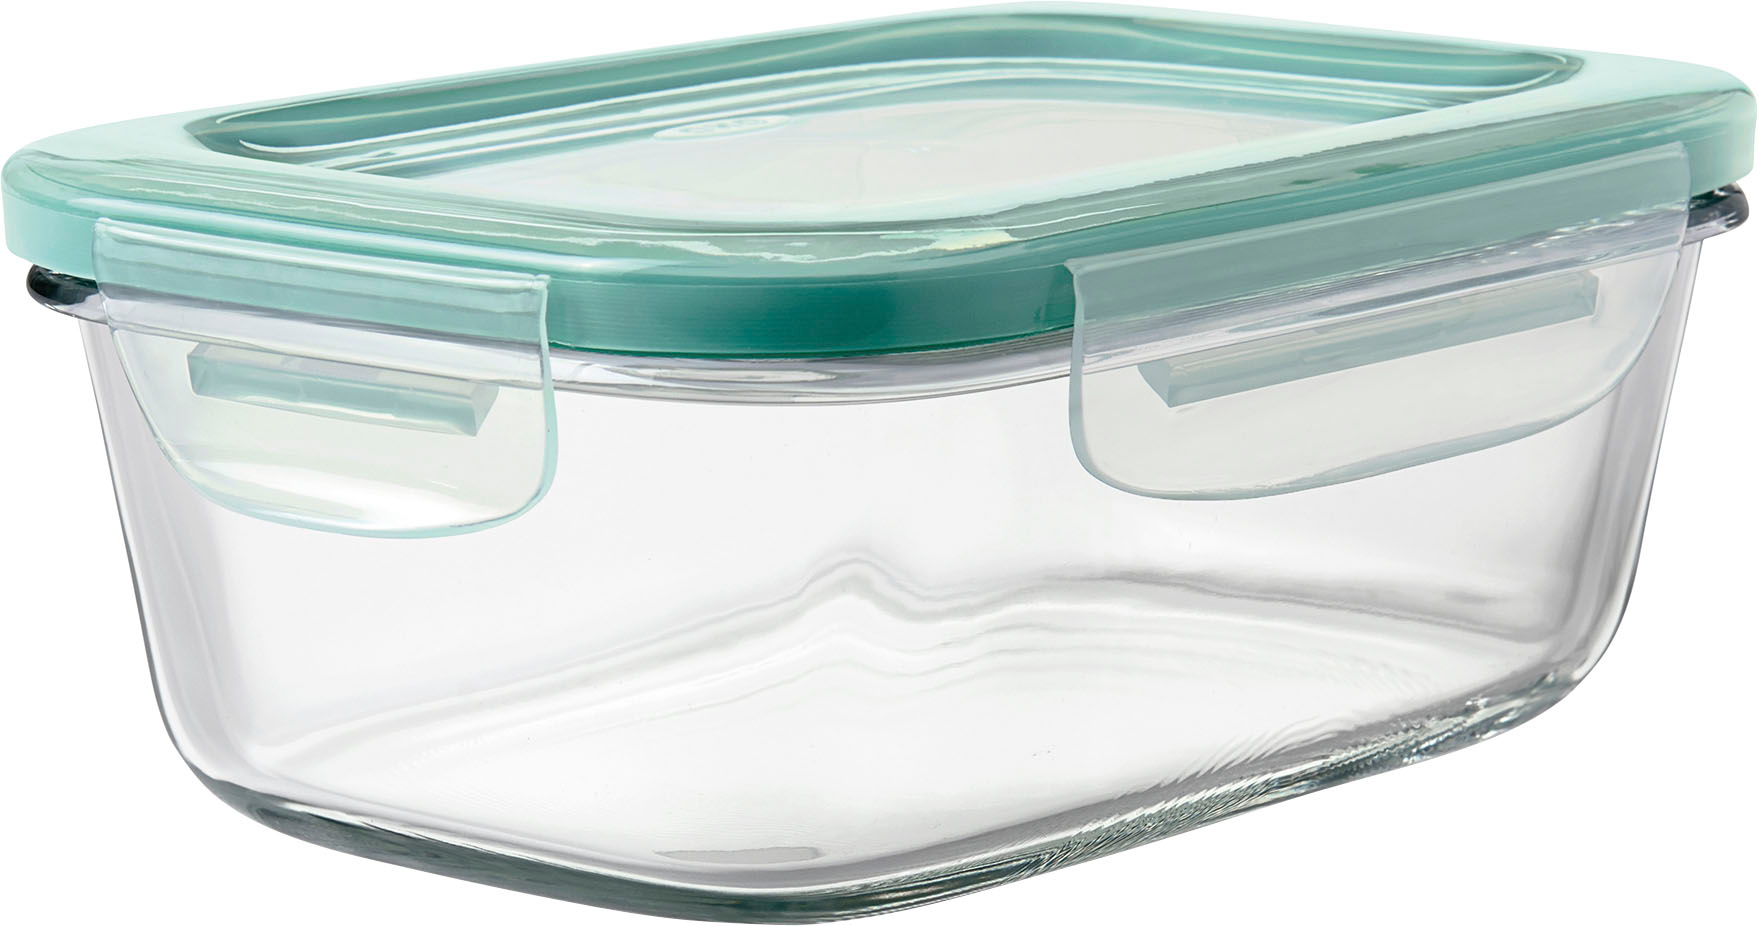 12 Piece Air Tight Food Storage Containers Set Clear Plastic Smart Seal